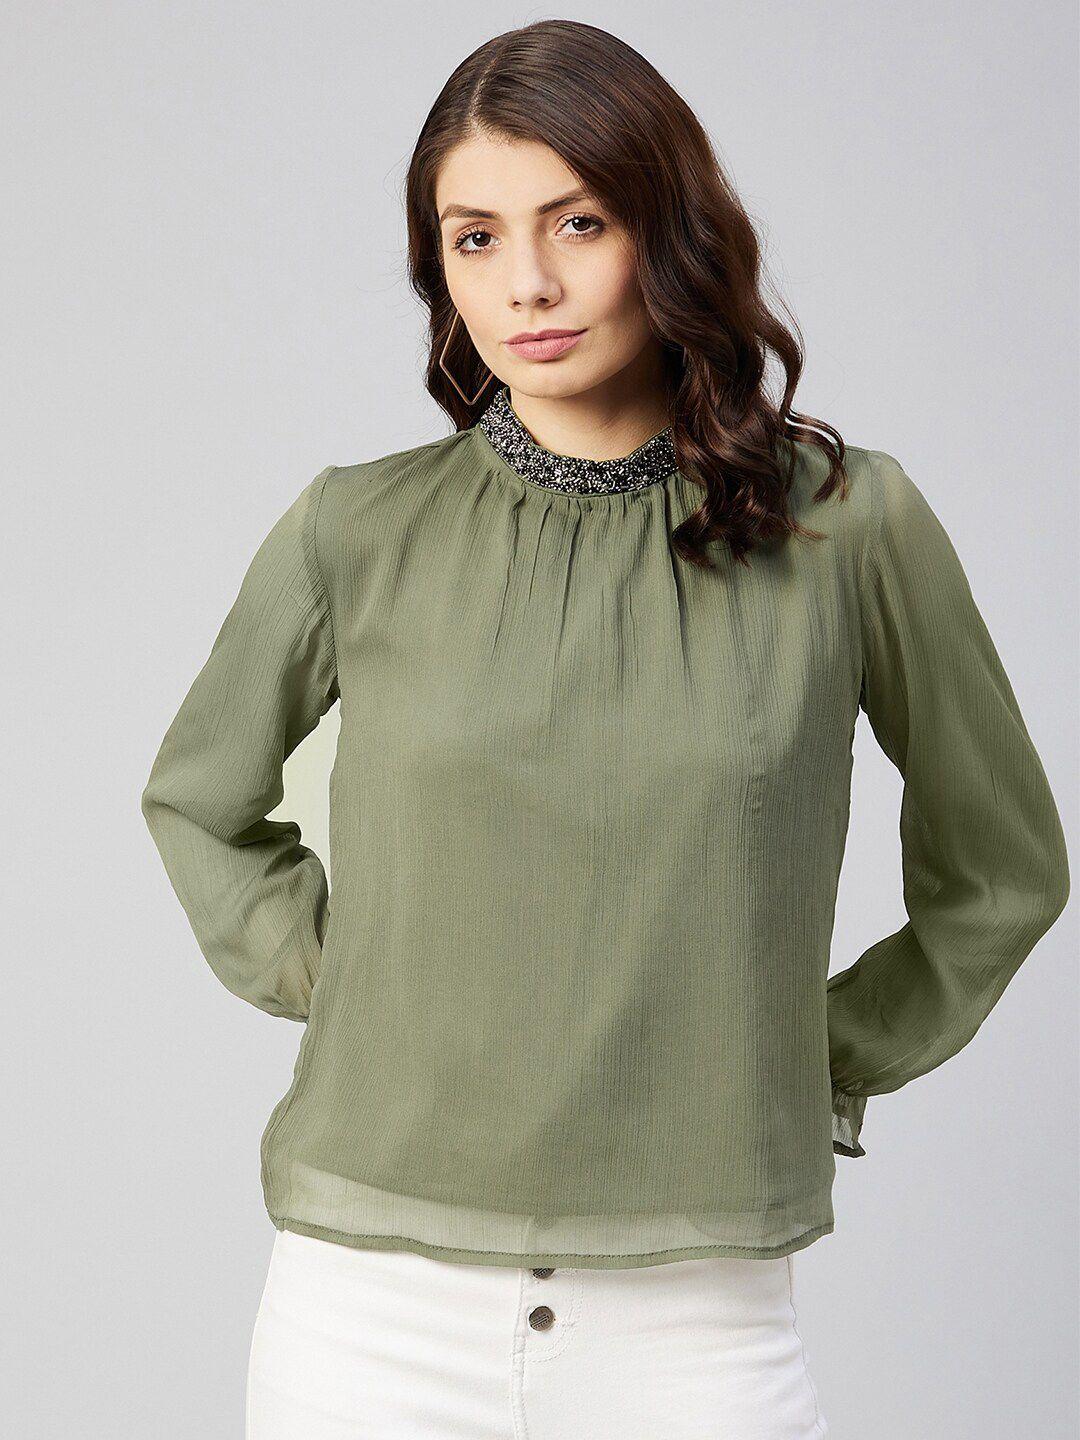 marie-claire-olive-green-solid-crinkled-chiffon-top-with-tie-ups-with-embellished-detail